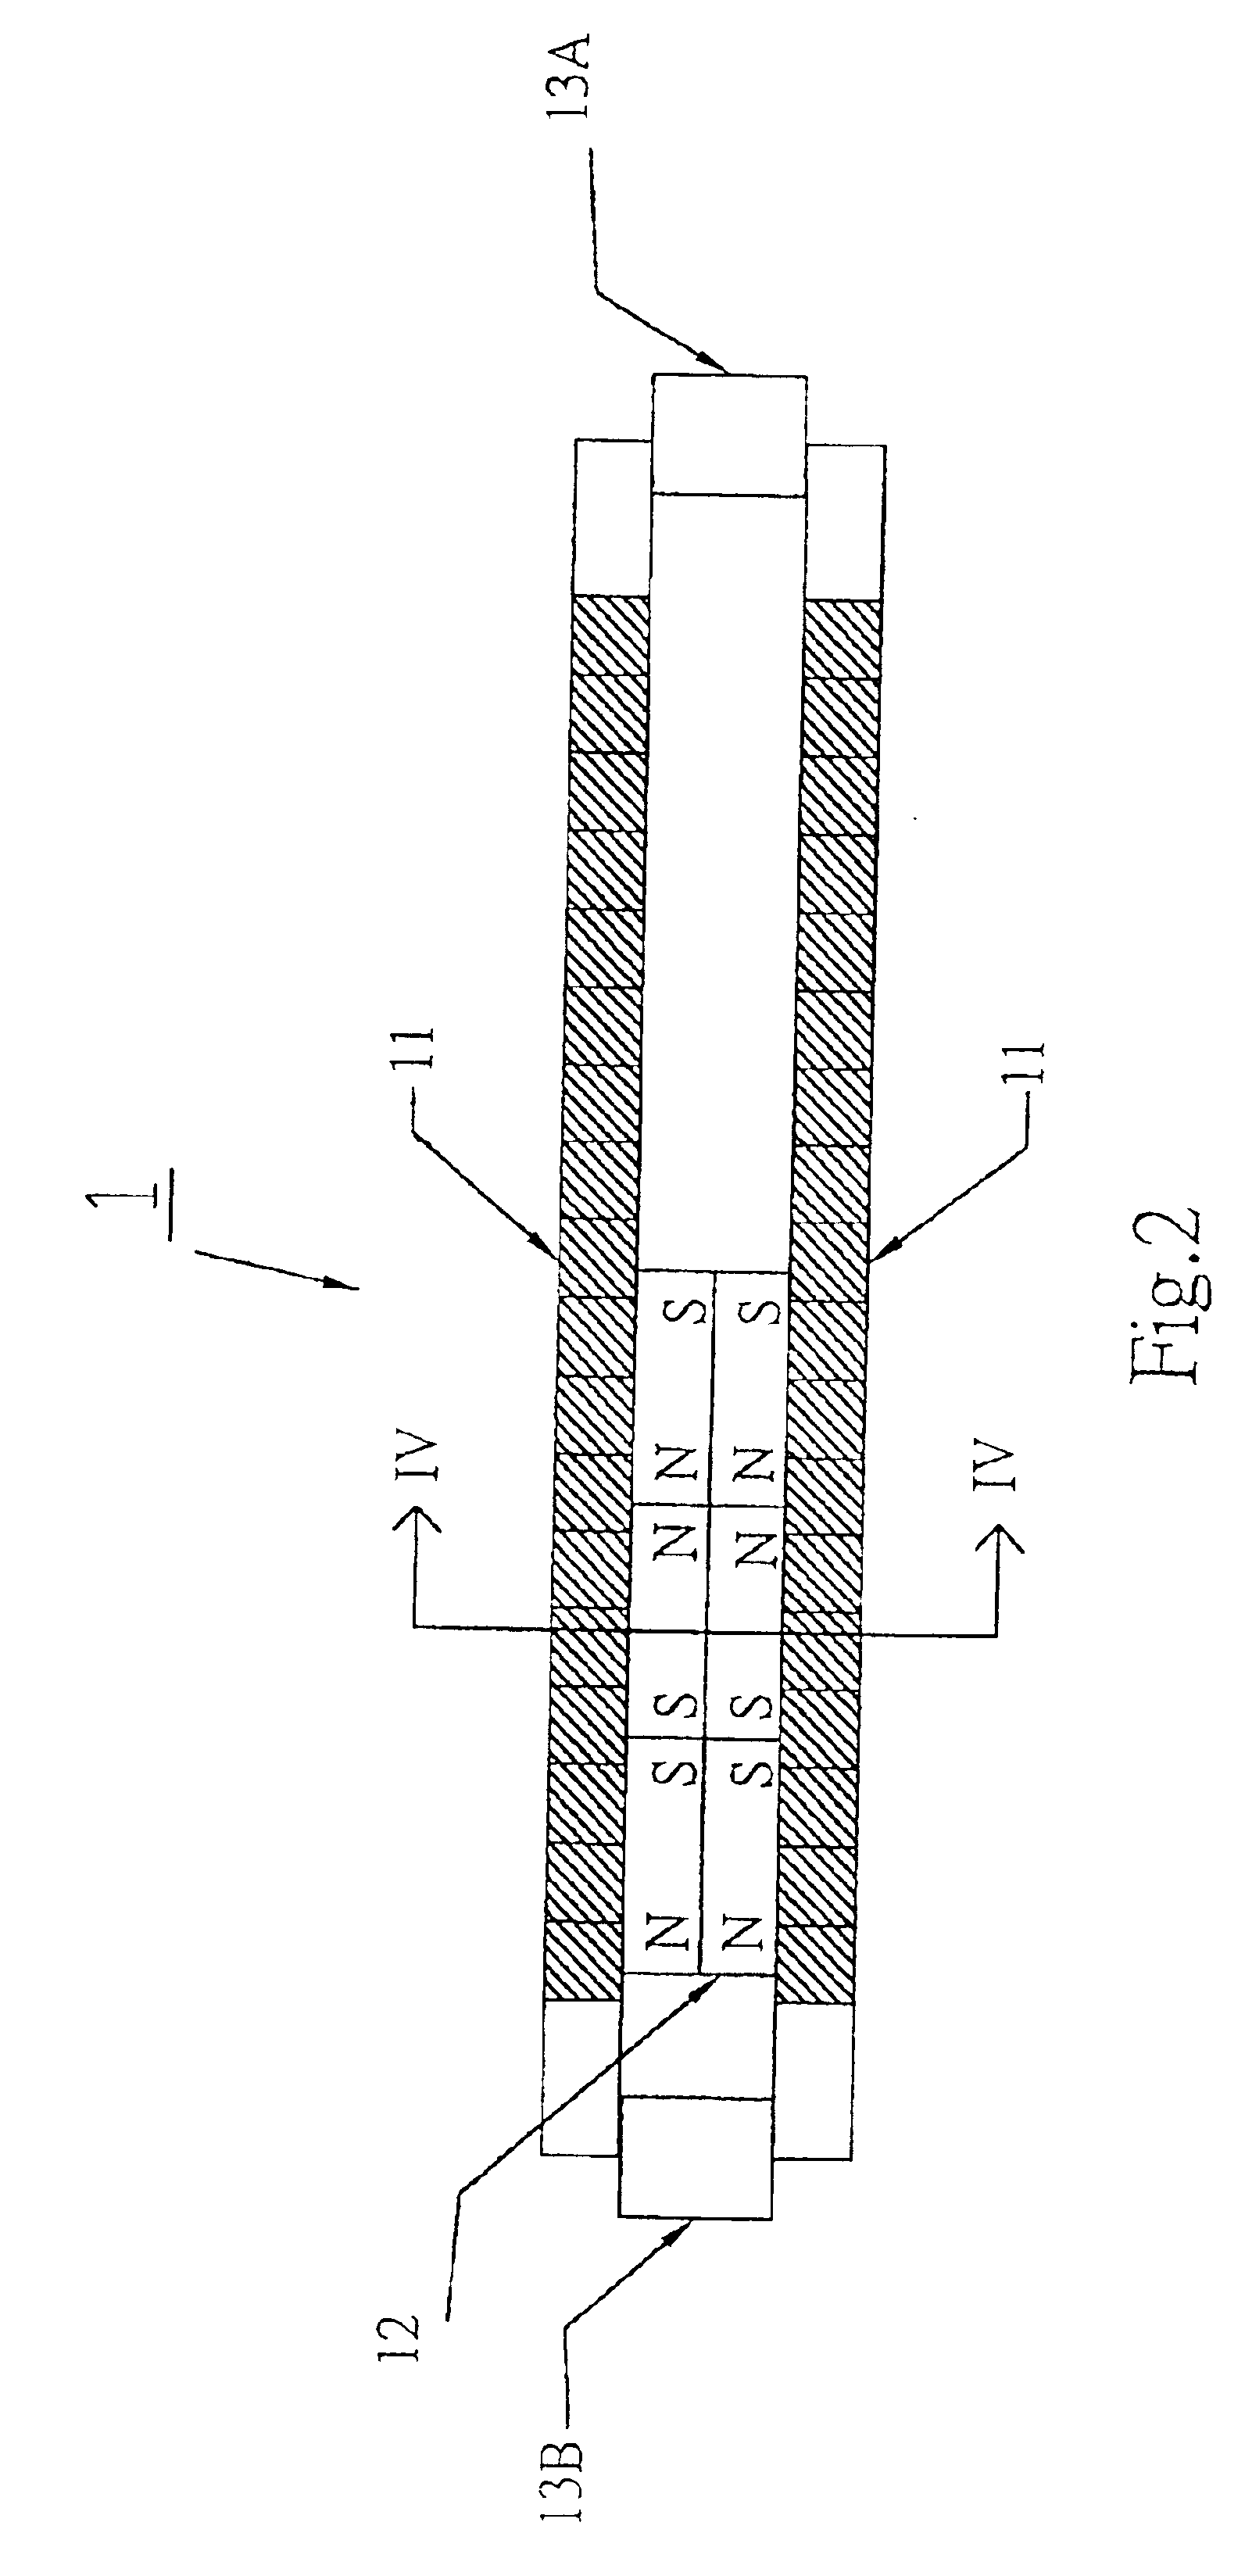 Linear electric generator having an improved magnet and coil structure, and method of manufacture